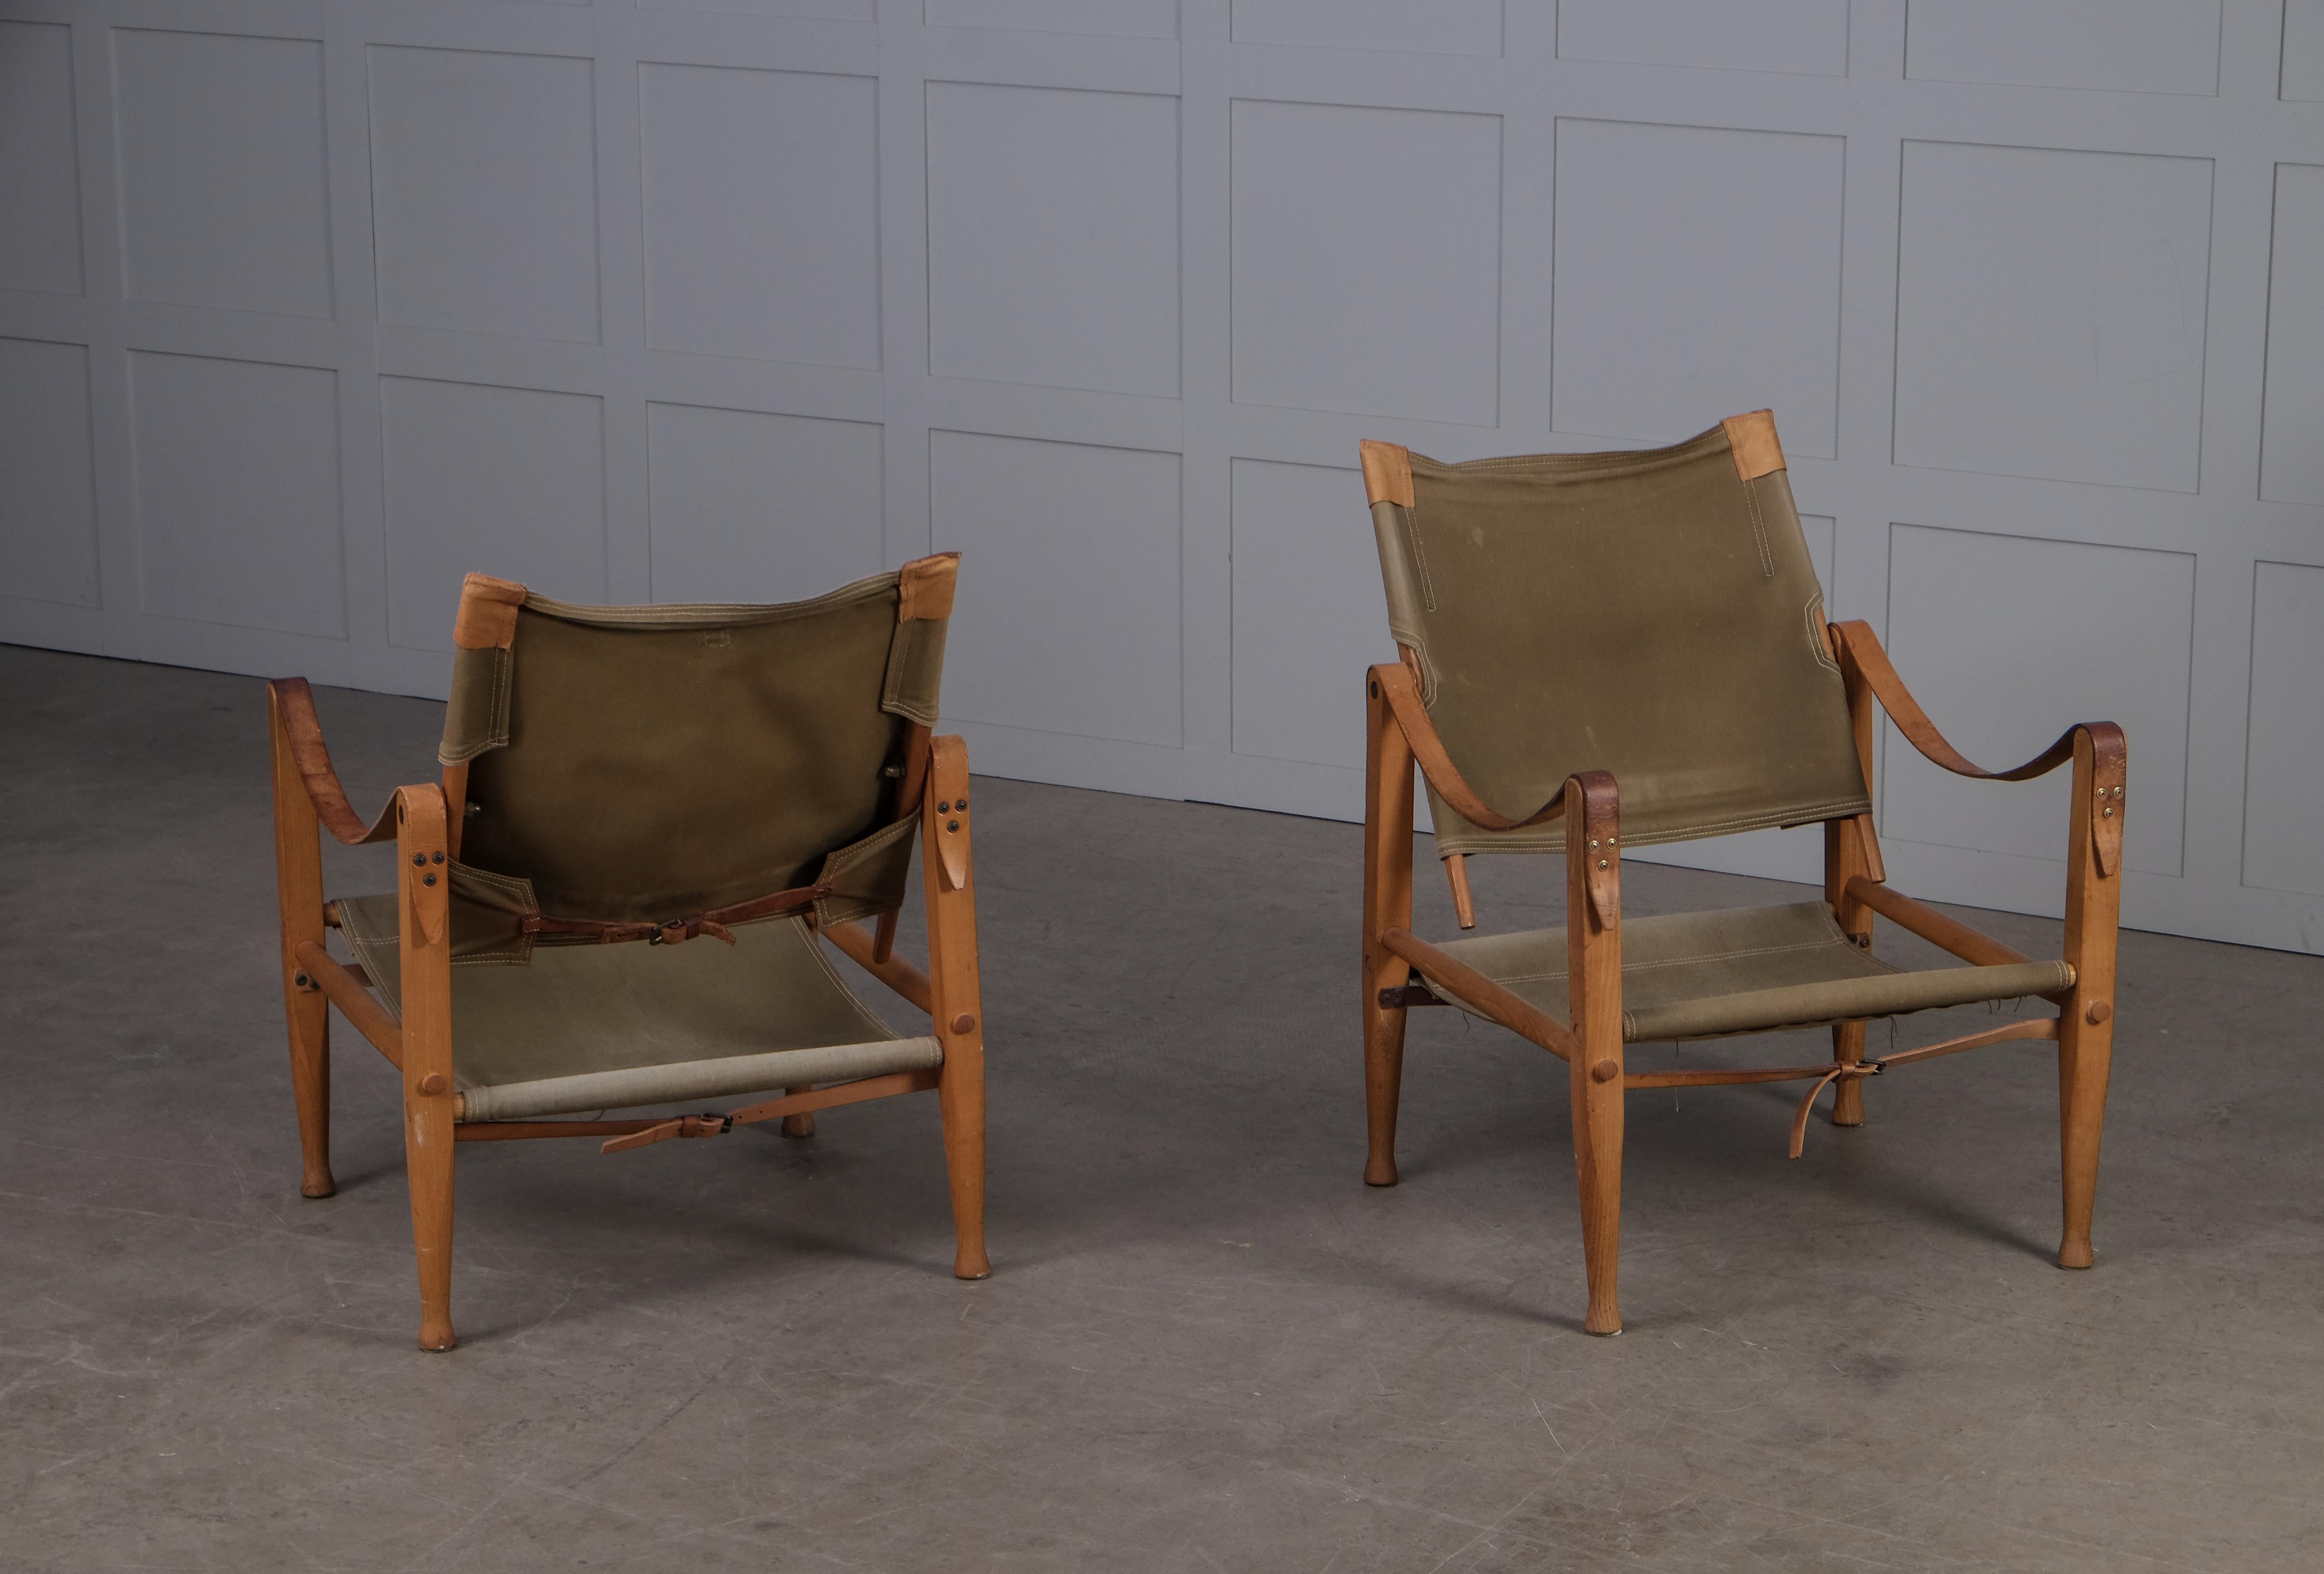 Military green safari chairs with patinated cognac brown leather straps. Designed by Kaare Klint in 1933, produced by Rud. Rasmussen, Denmark, 1960s.
Global front door shipping: €400.